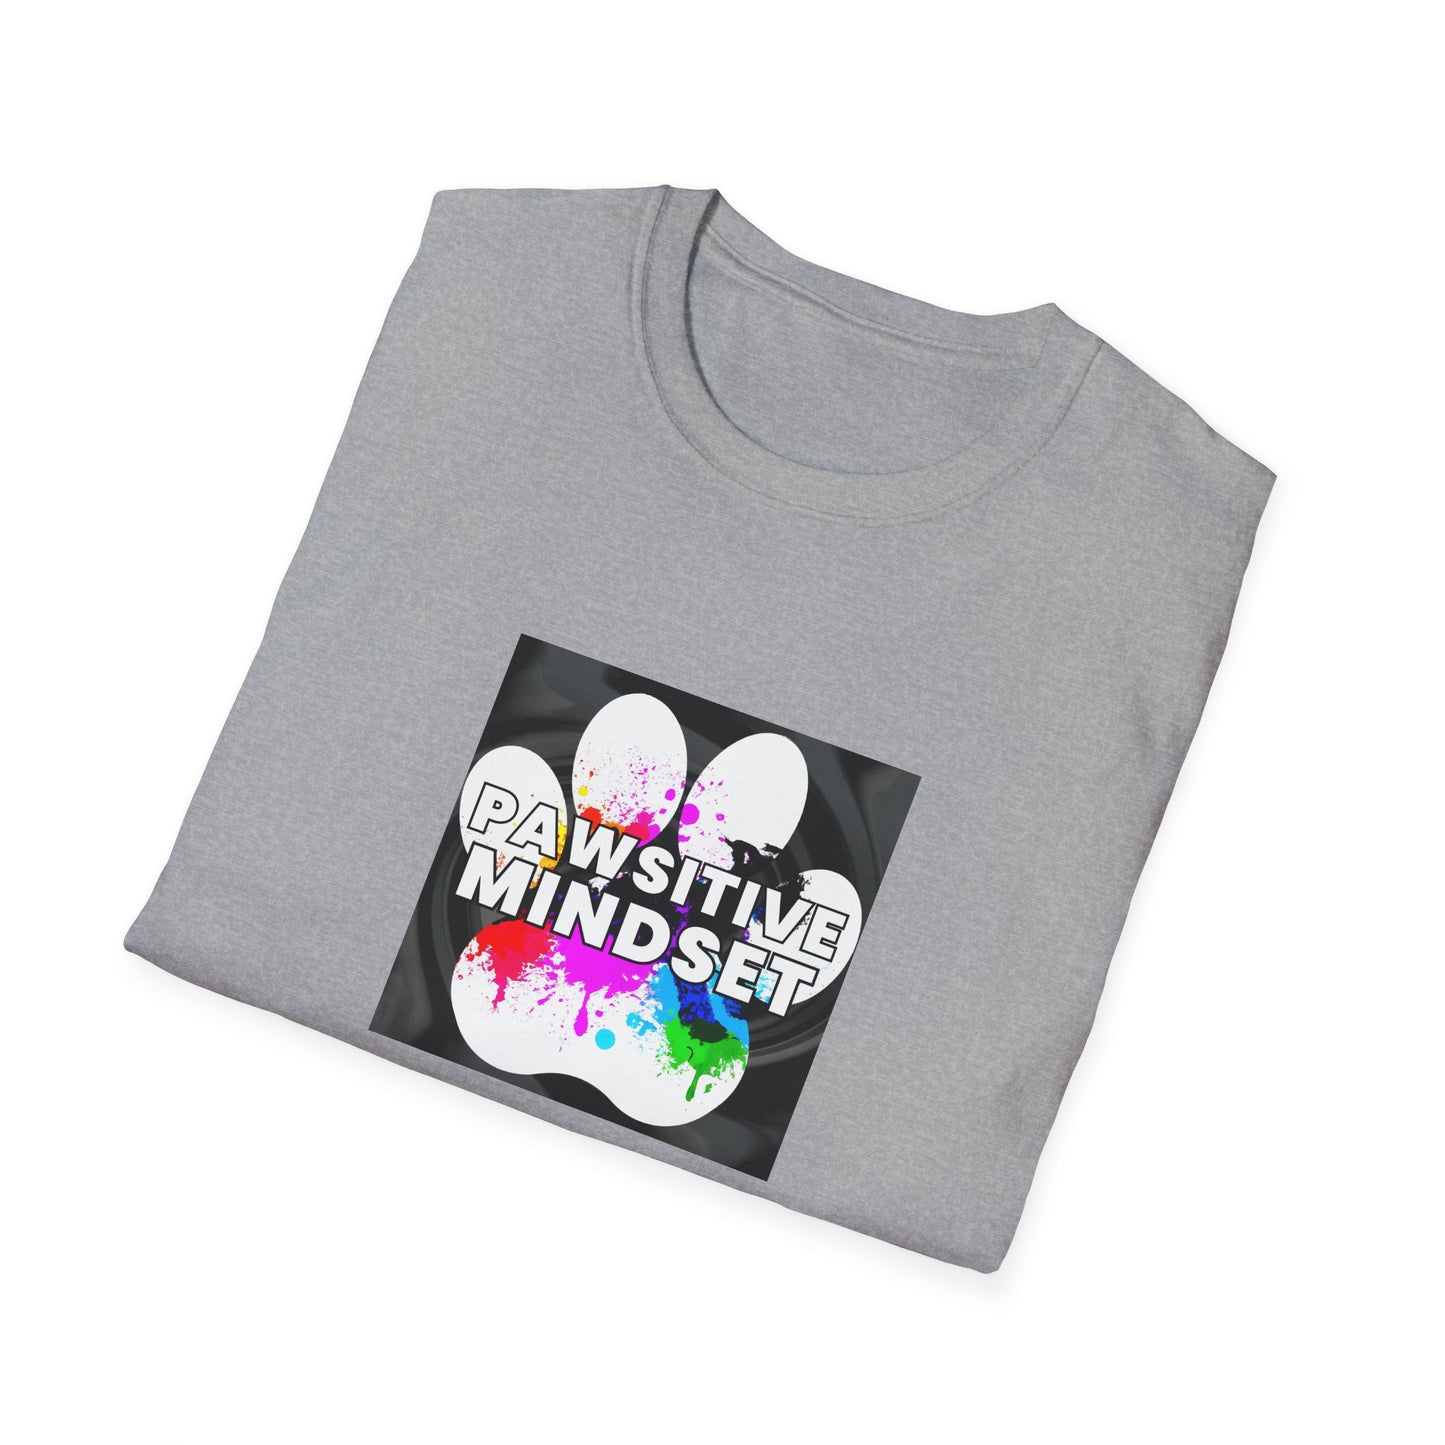 Streetwise Styles by Sage. - "Pawsitive Mindset" Unisex Tee